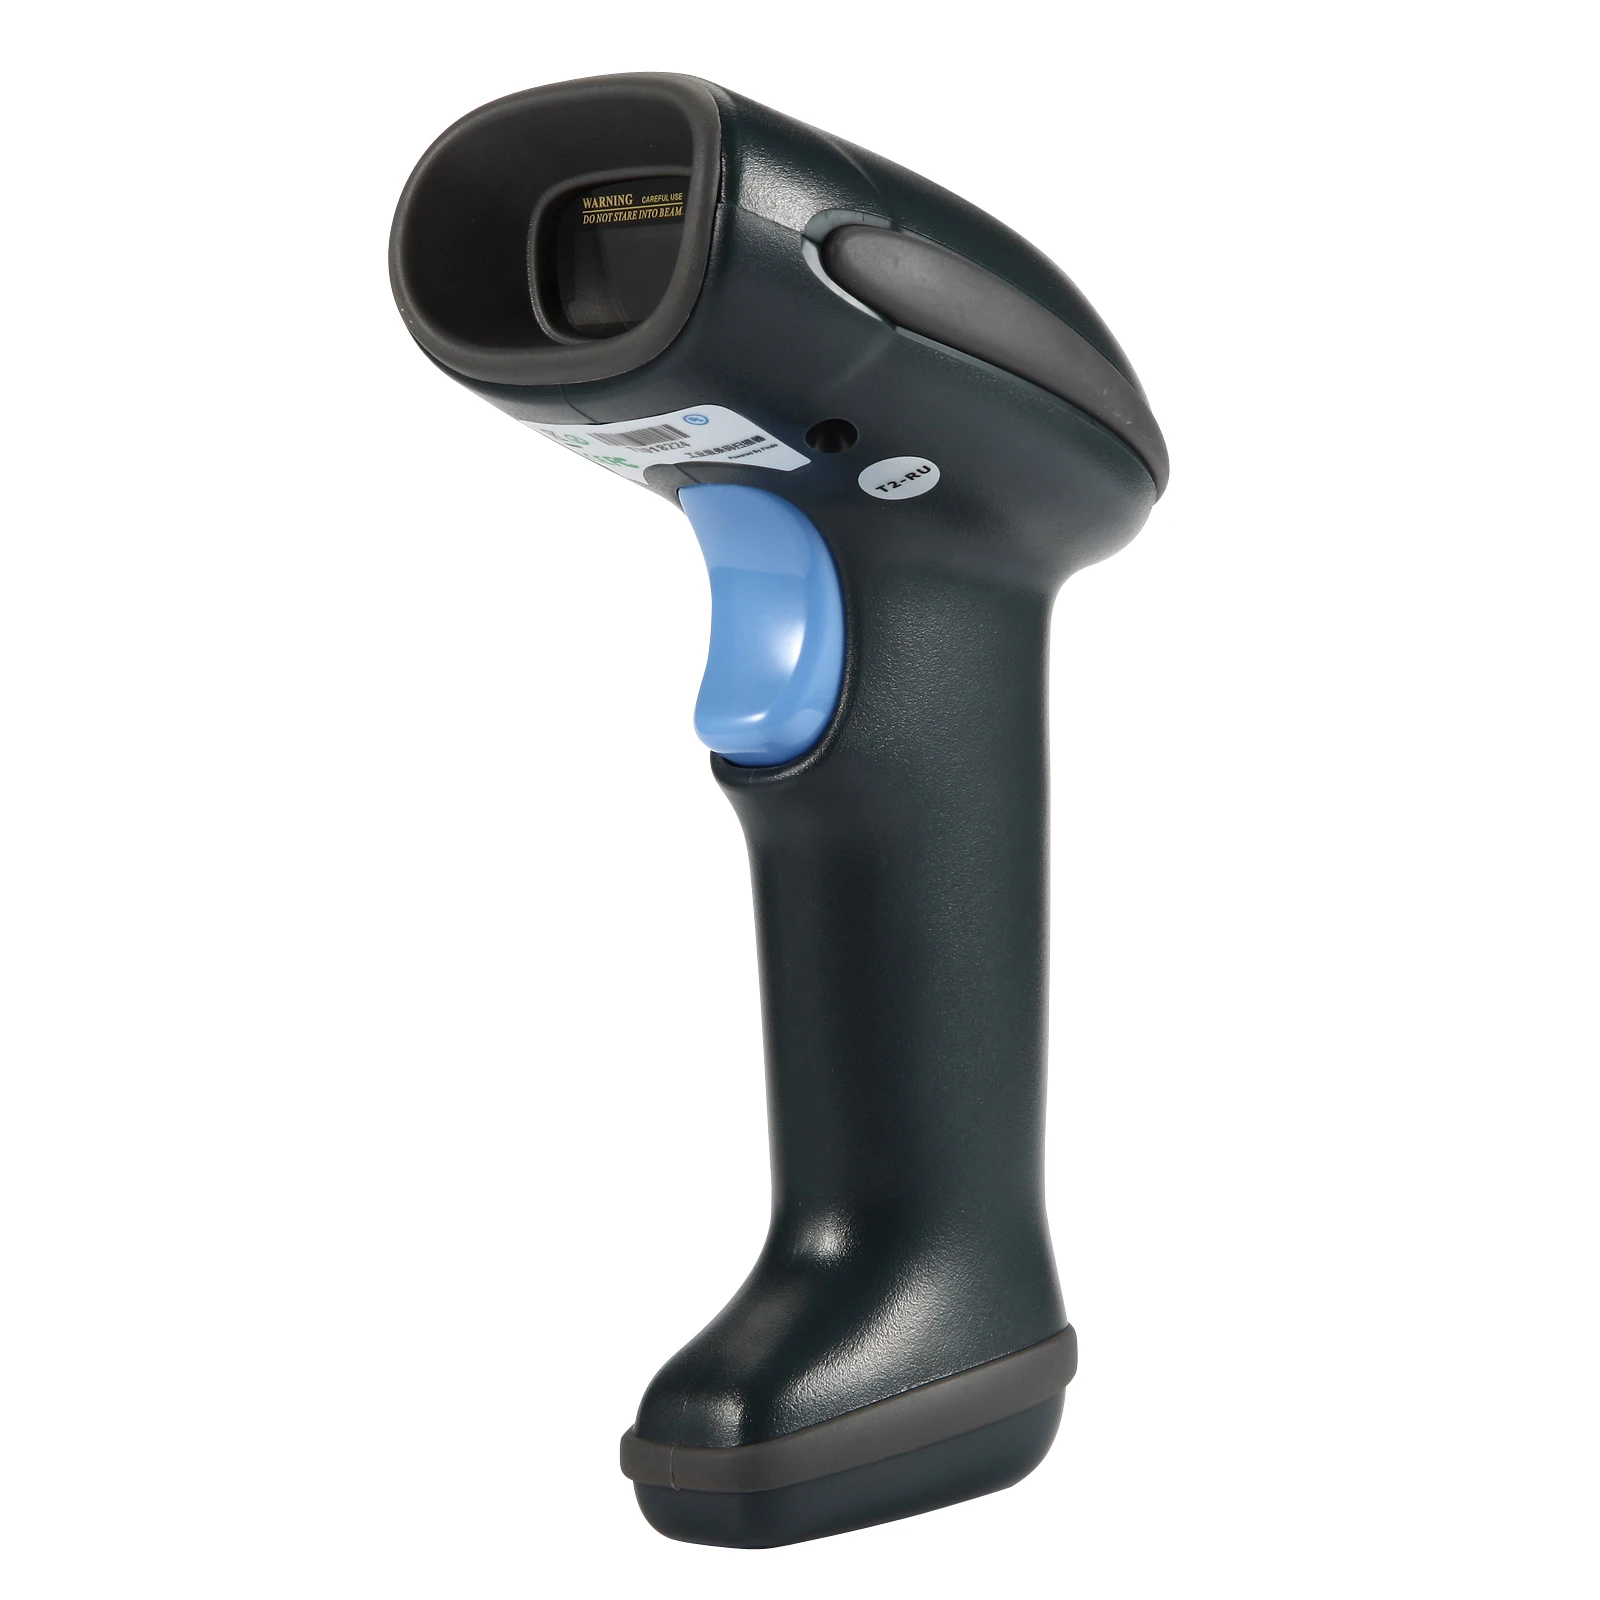 

2D Wired Barcode Scanner USB Interface for PC, POS, ipad, and Other Terminal Devices read QR, PDF 417, Data Matrix